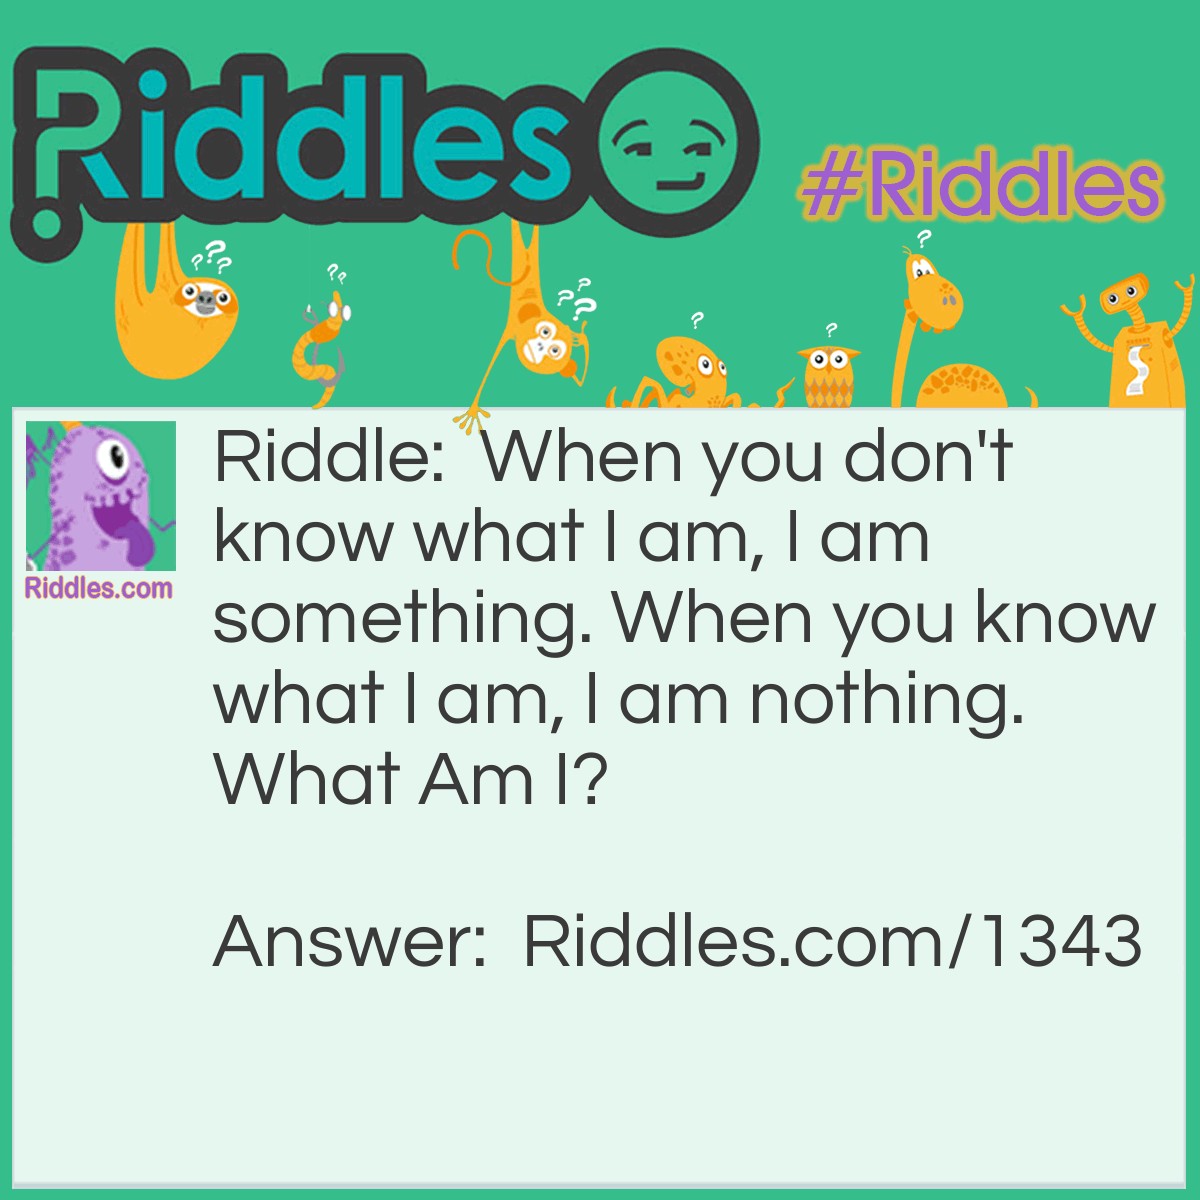 Riddle: When you don't know what I am, I am something. When you know what I am, I am nothing.
What Am I? Answer: The answer was what that question was! The answer would be a riddle! a riddle would be nothing if you knew it and if you dunt know the answer to the riddle, it's still something.